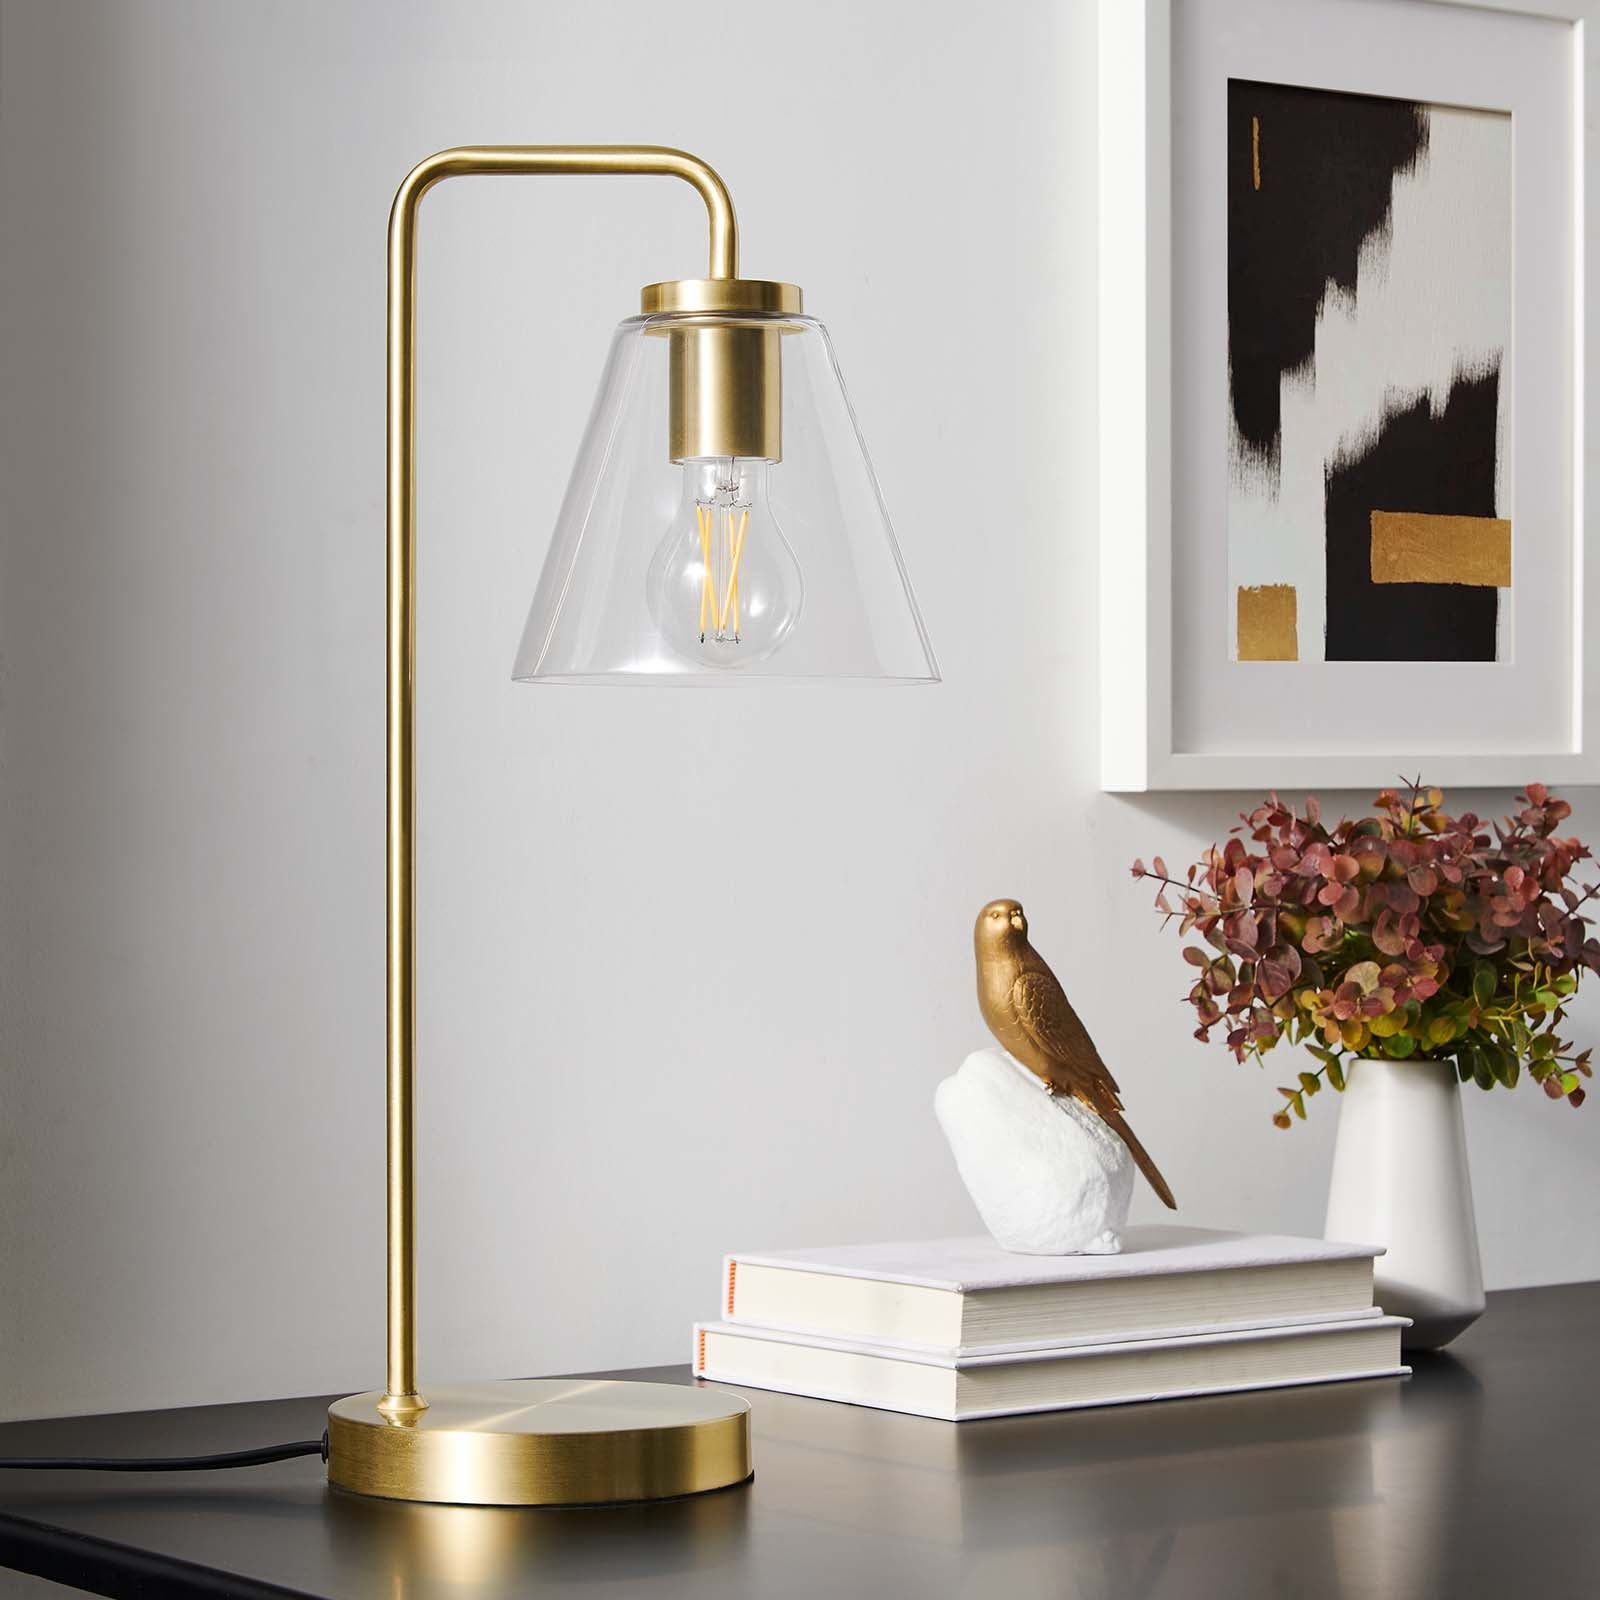 Modway Table Lamps - Element Glass Table Lamp Satin Brass